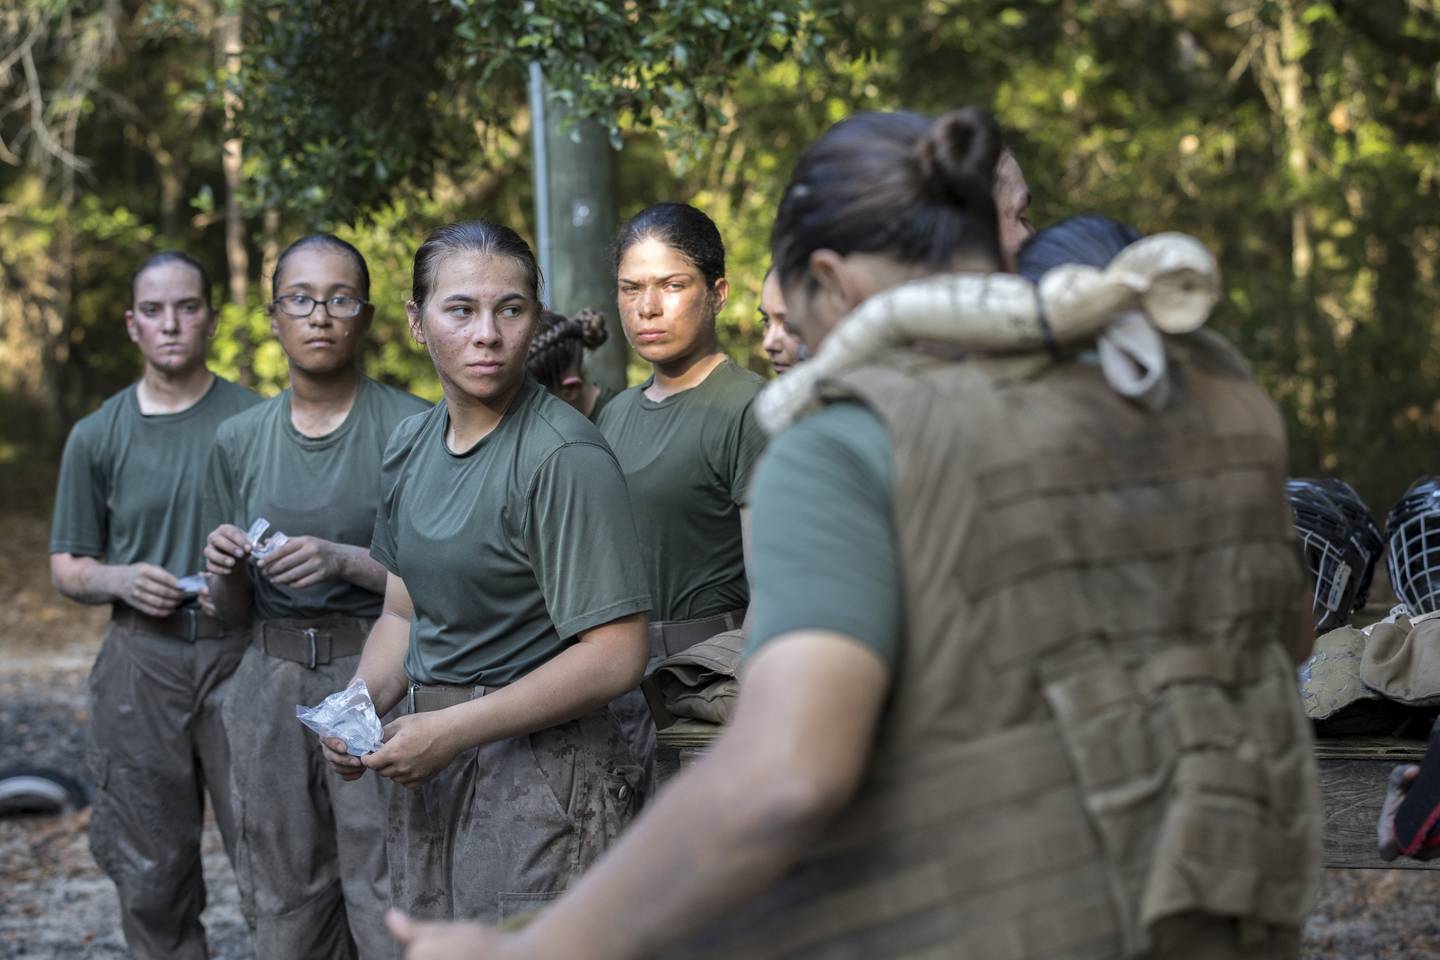 Members of a platoon of female U.S. Marine Corps recruits gear up before training in hand-to-hand combat at the Marine Corps Recruit Depot, Thursday, June 29, 2023, in Parris Island, S.C.